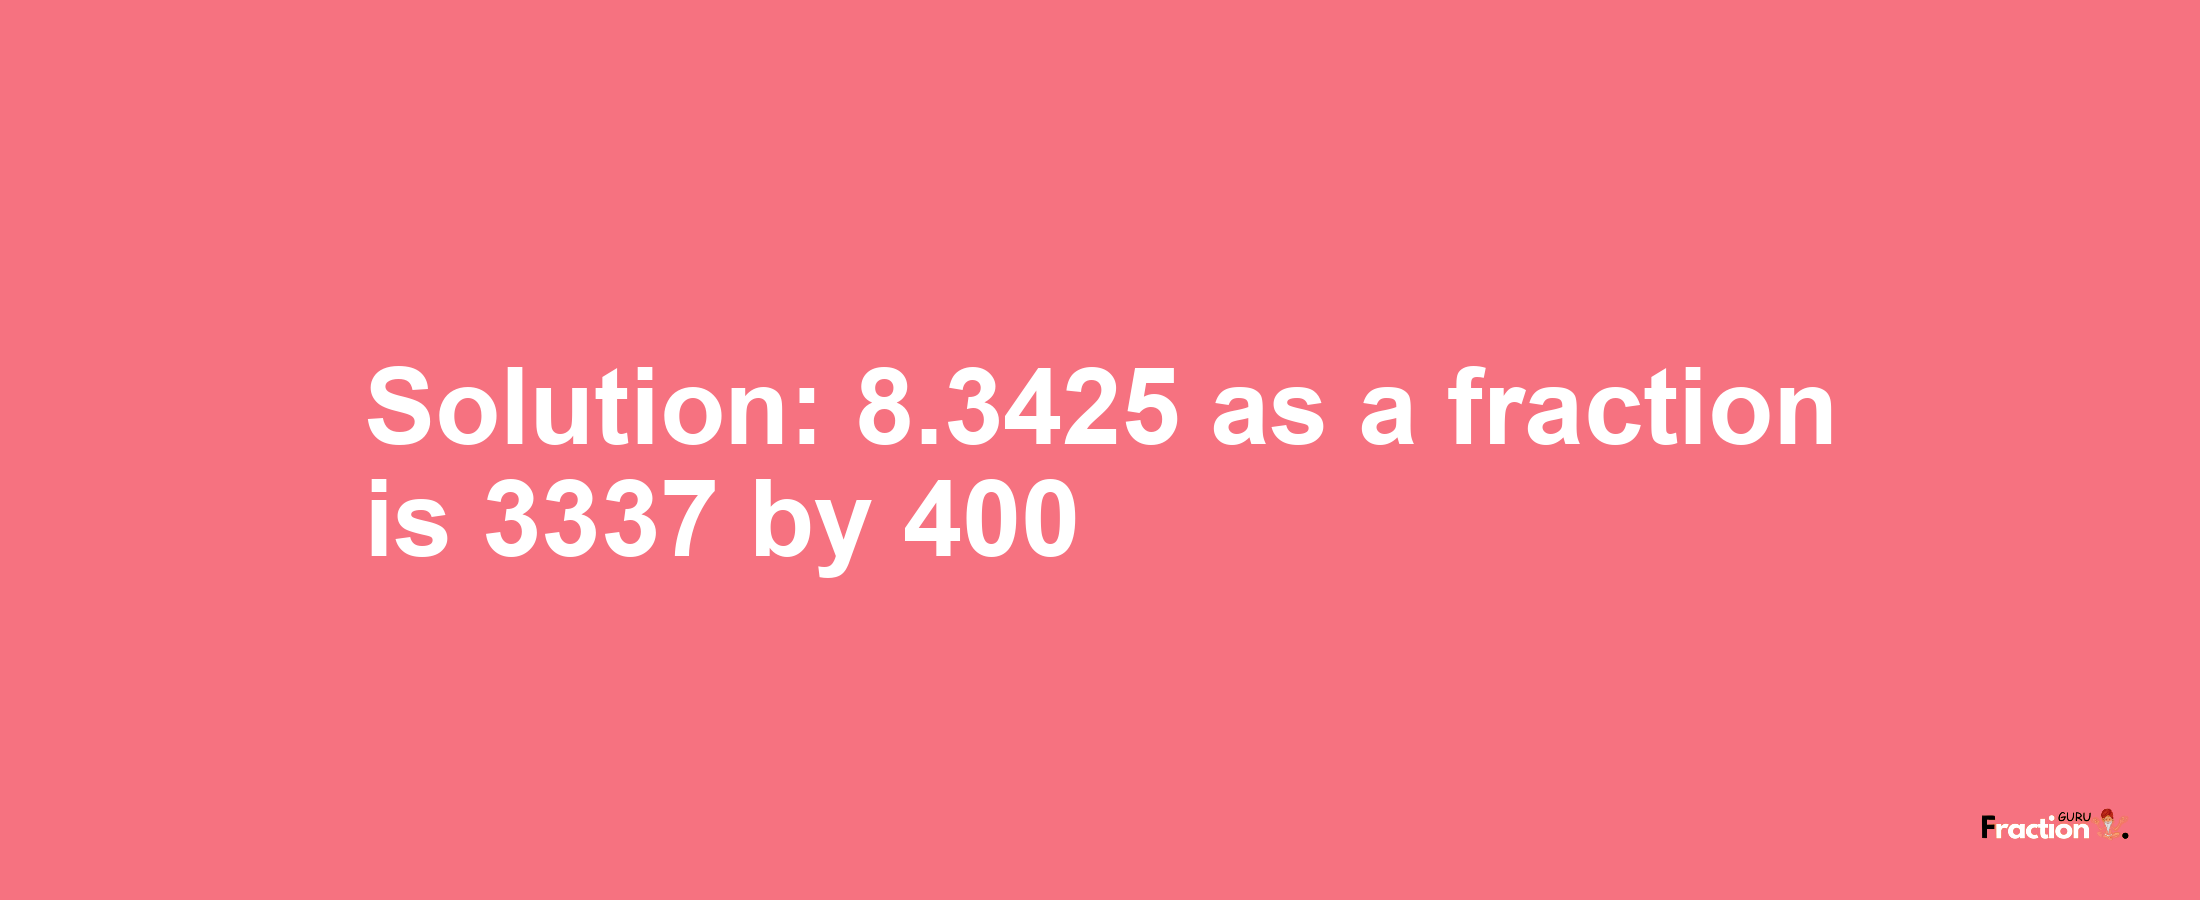 Solution:8.3425 as a fraction is 3337/400